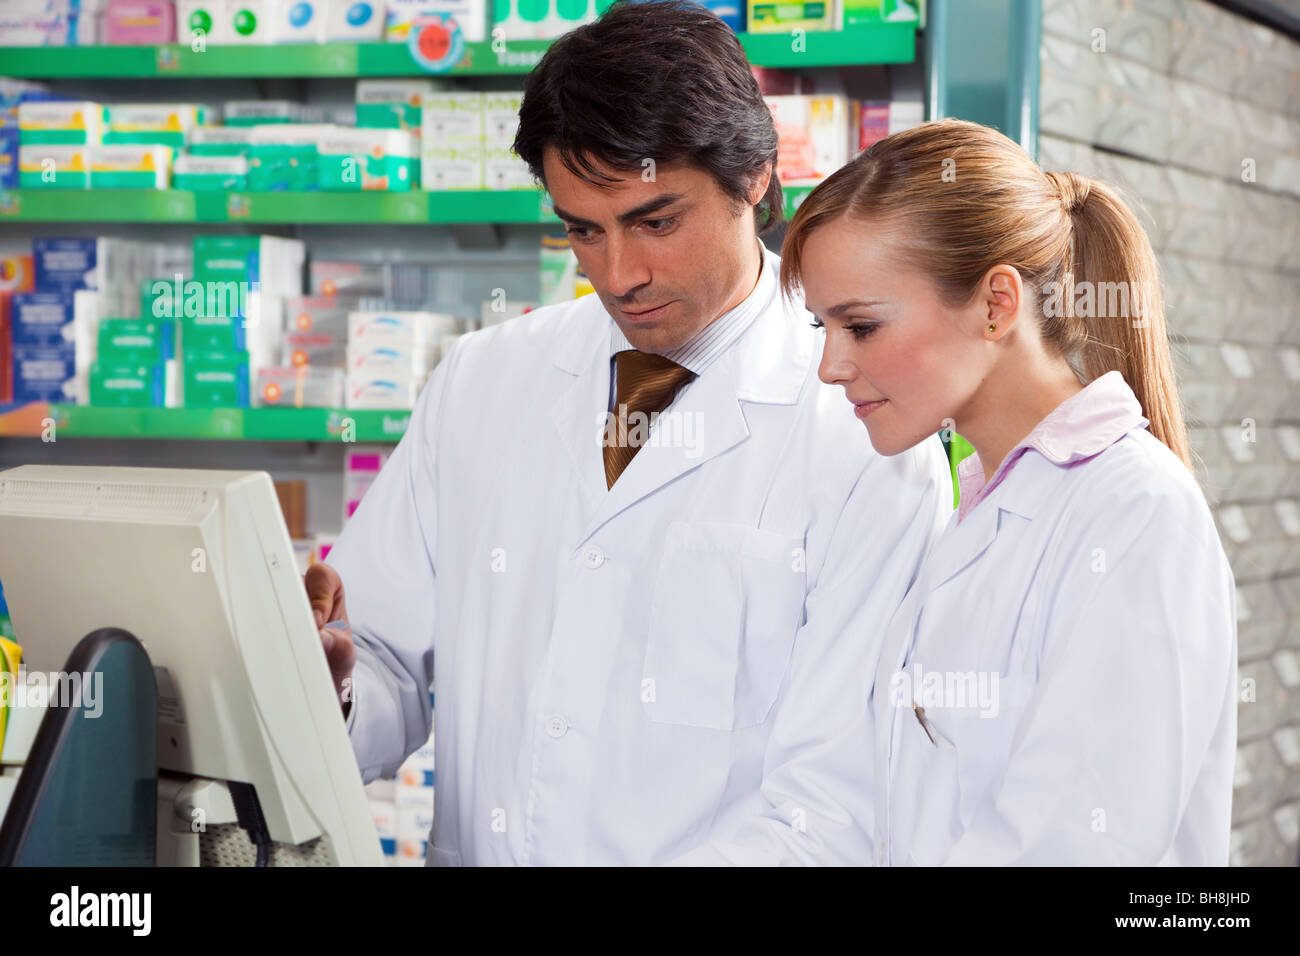 male and female pharmacists looking at computer screen Stock Photo